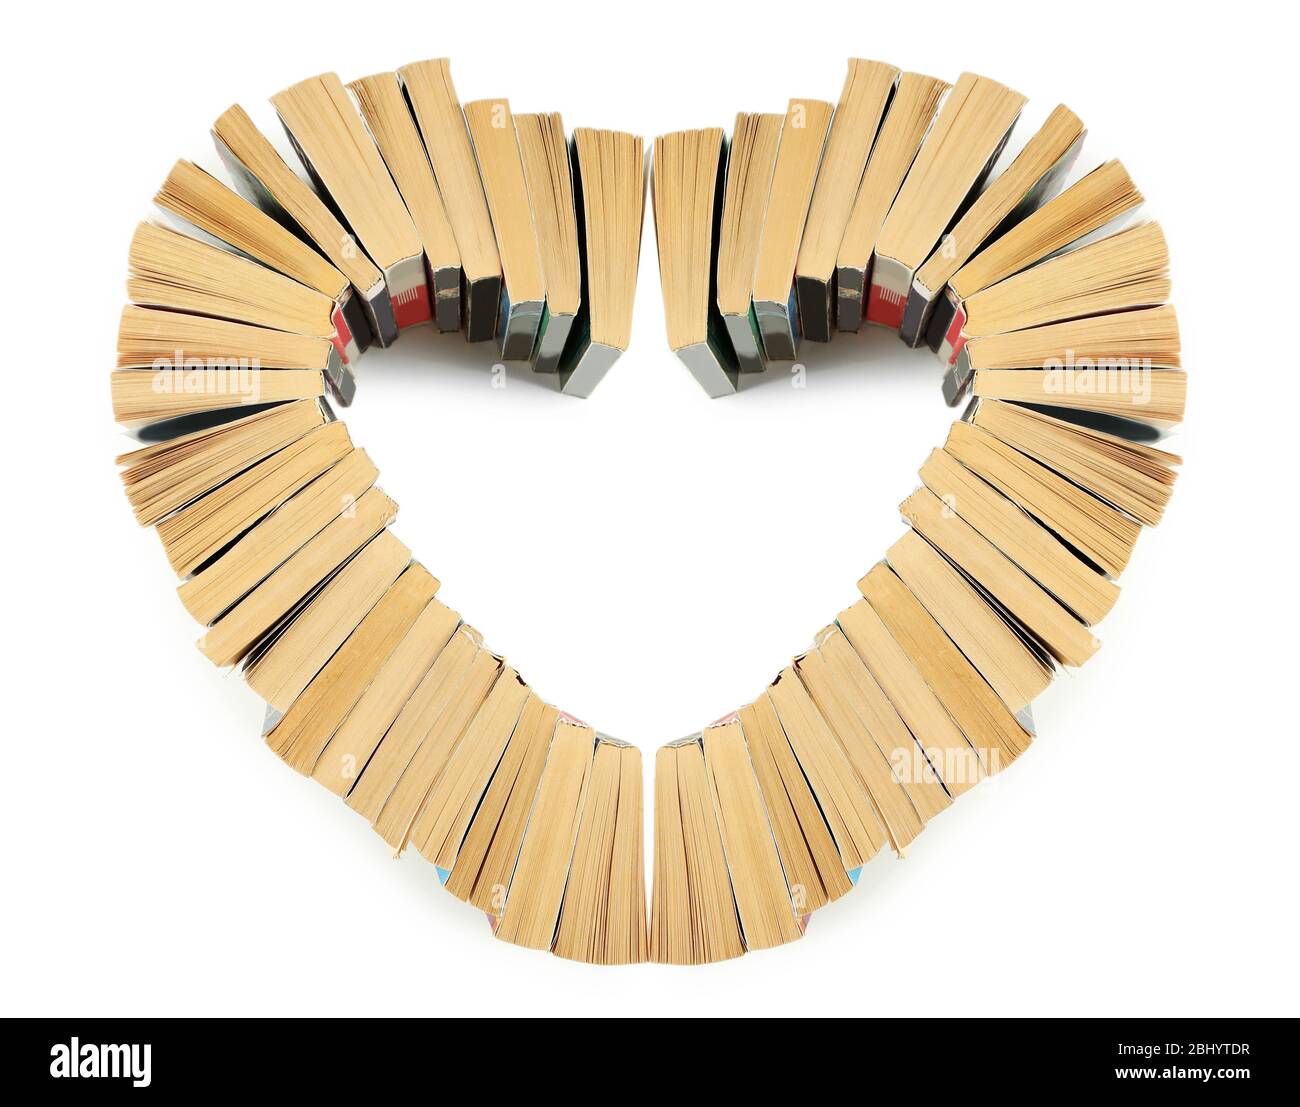 Part of heart made with books Stock Photo - Alamy